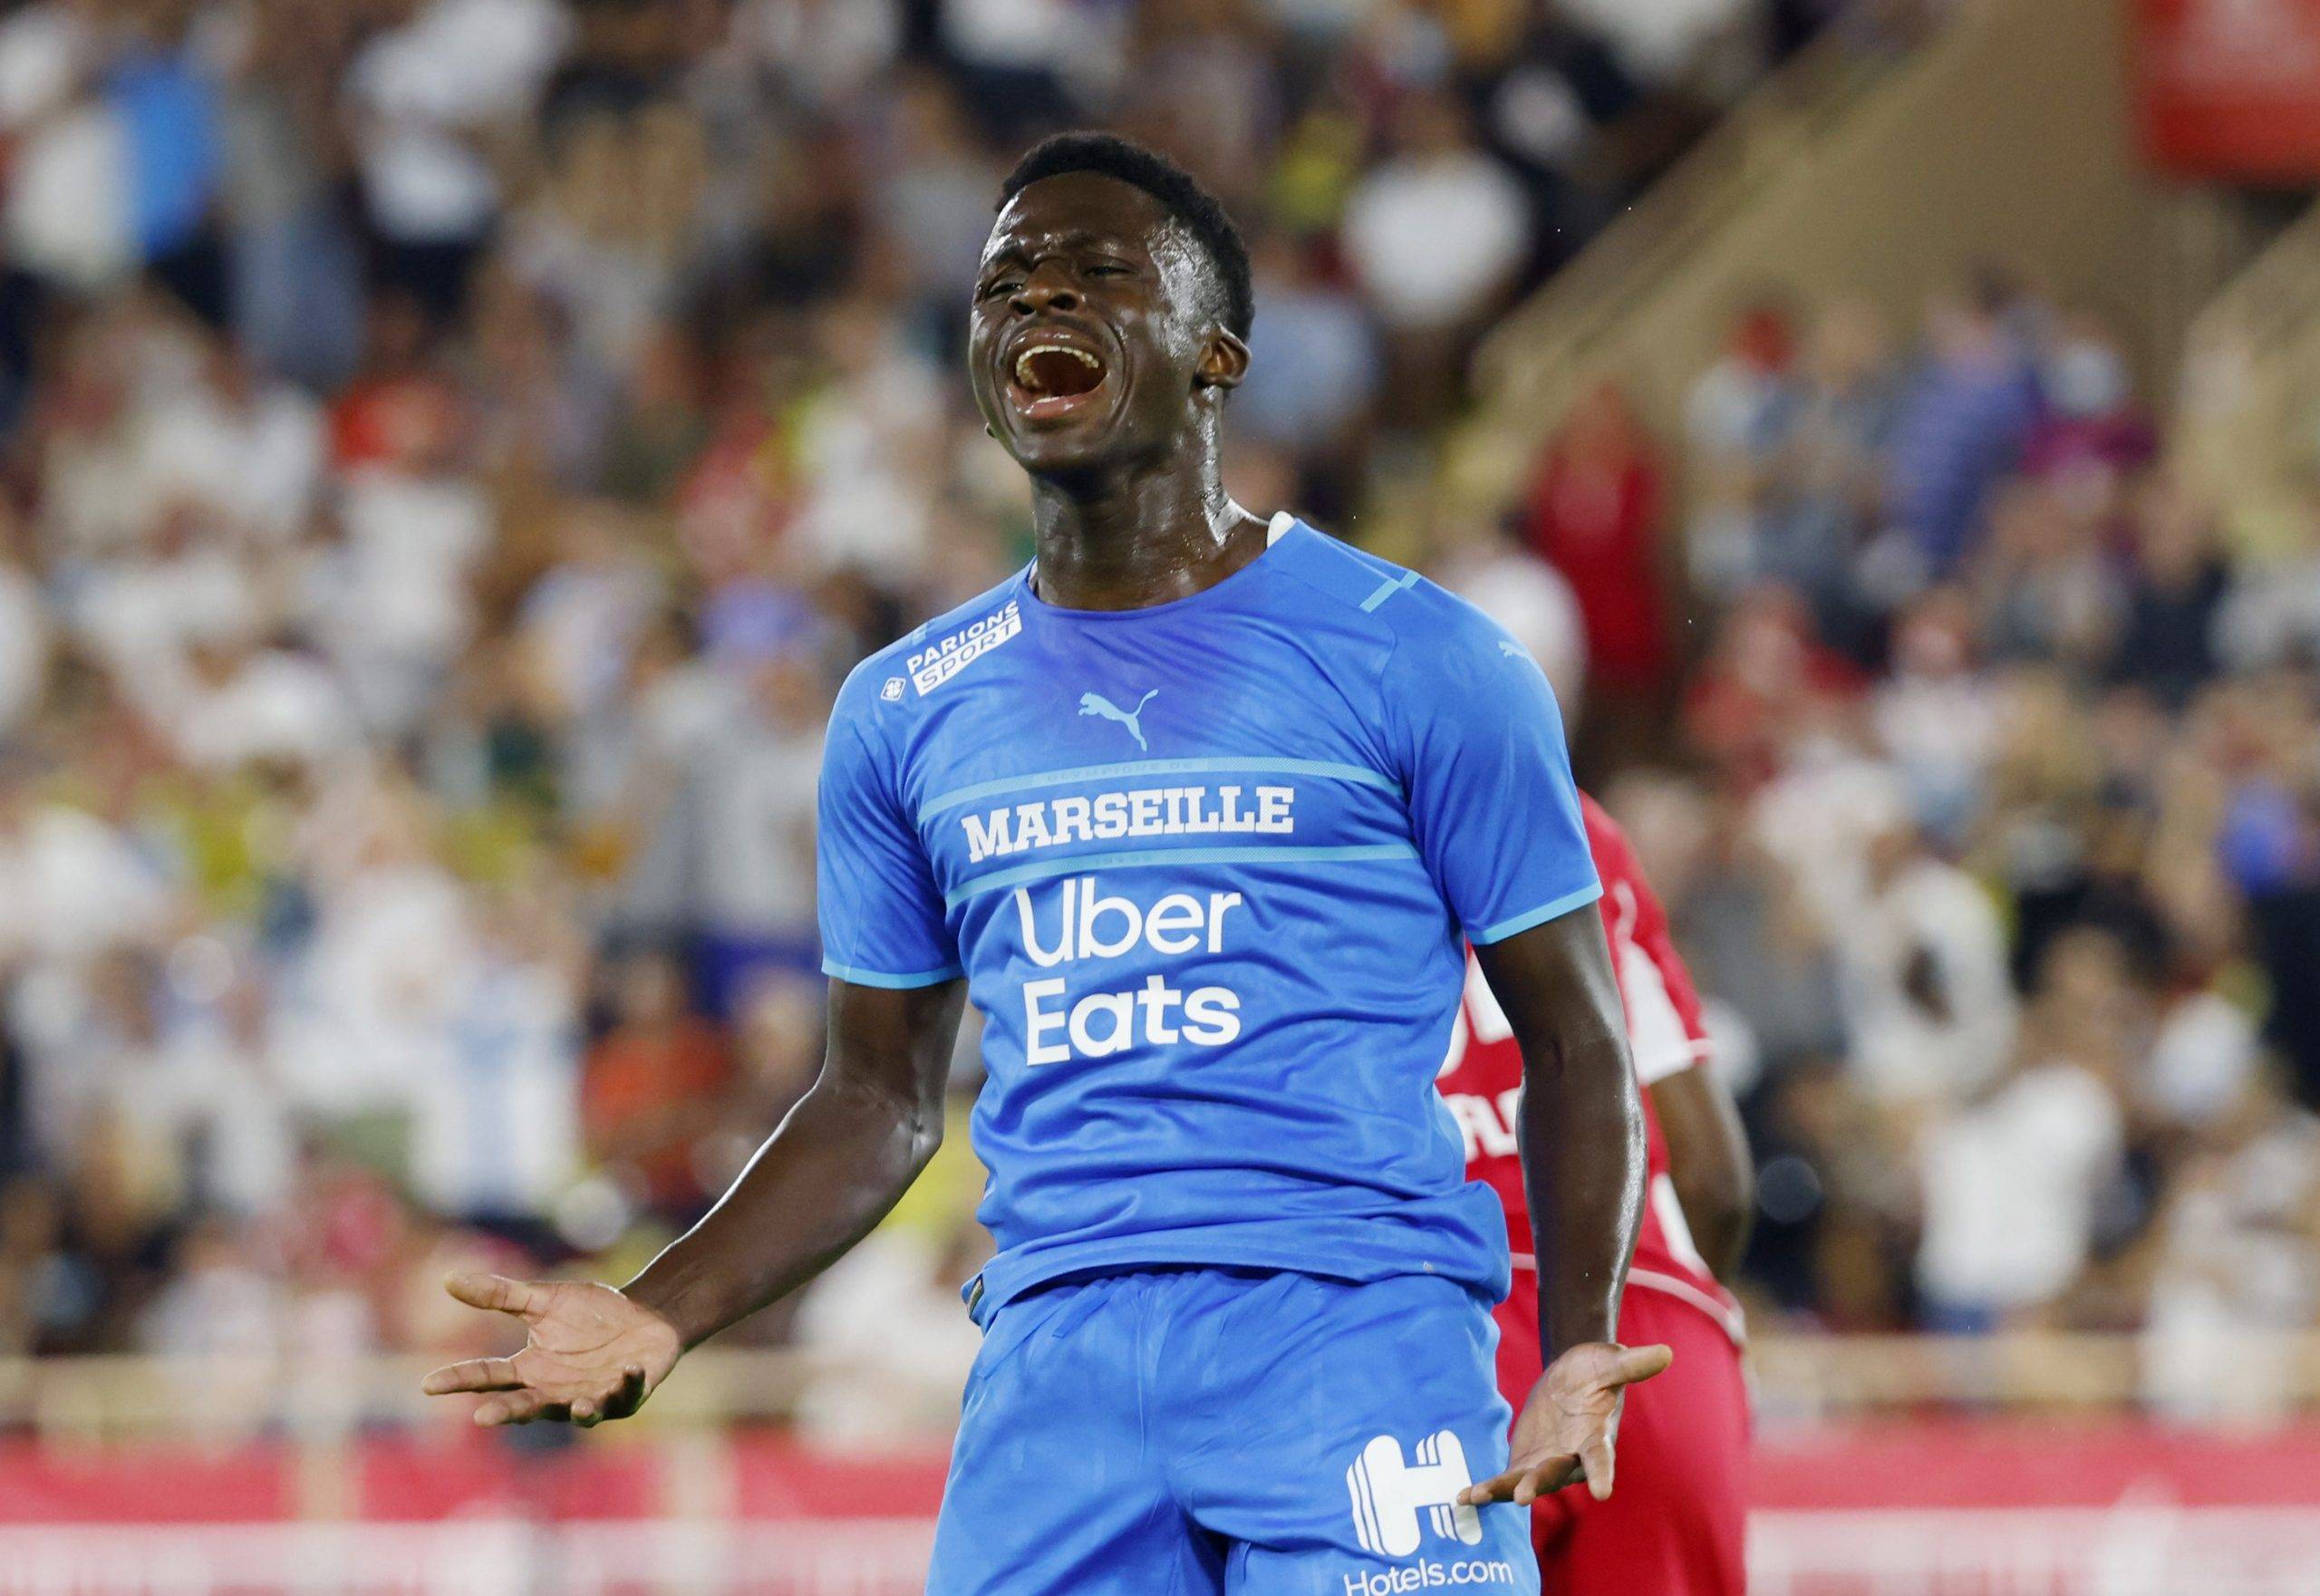 West Ham: Hammers keeping tabs on Bamba Dieng - Premier League News